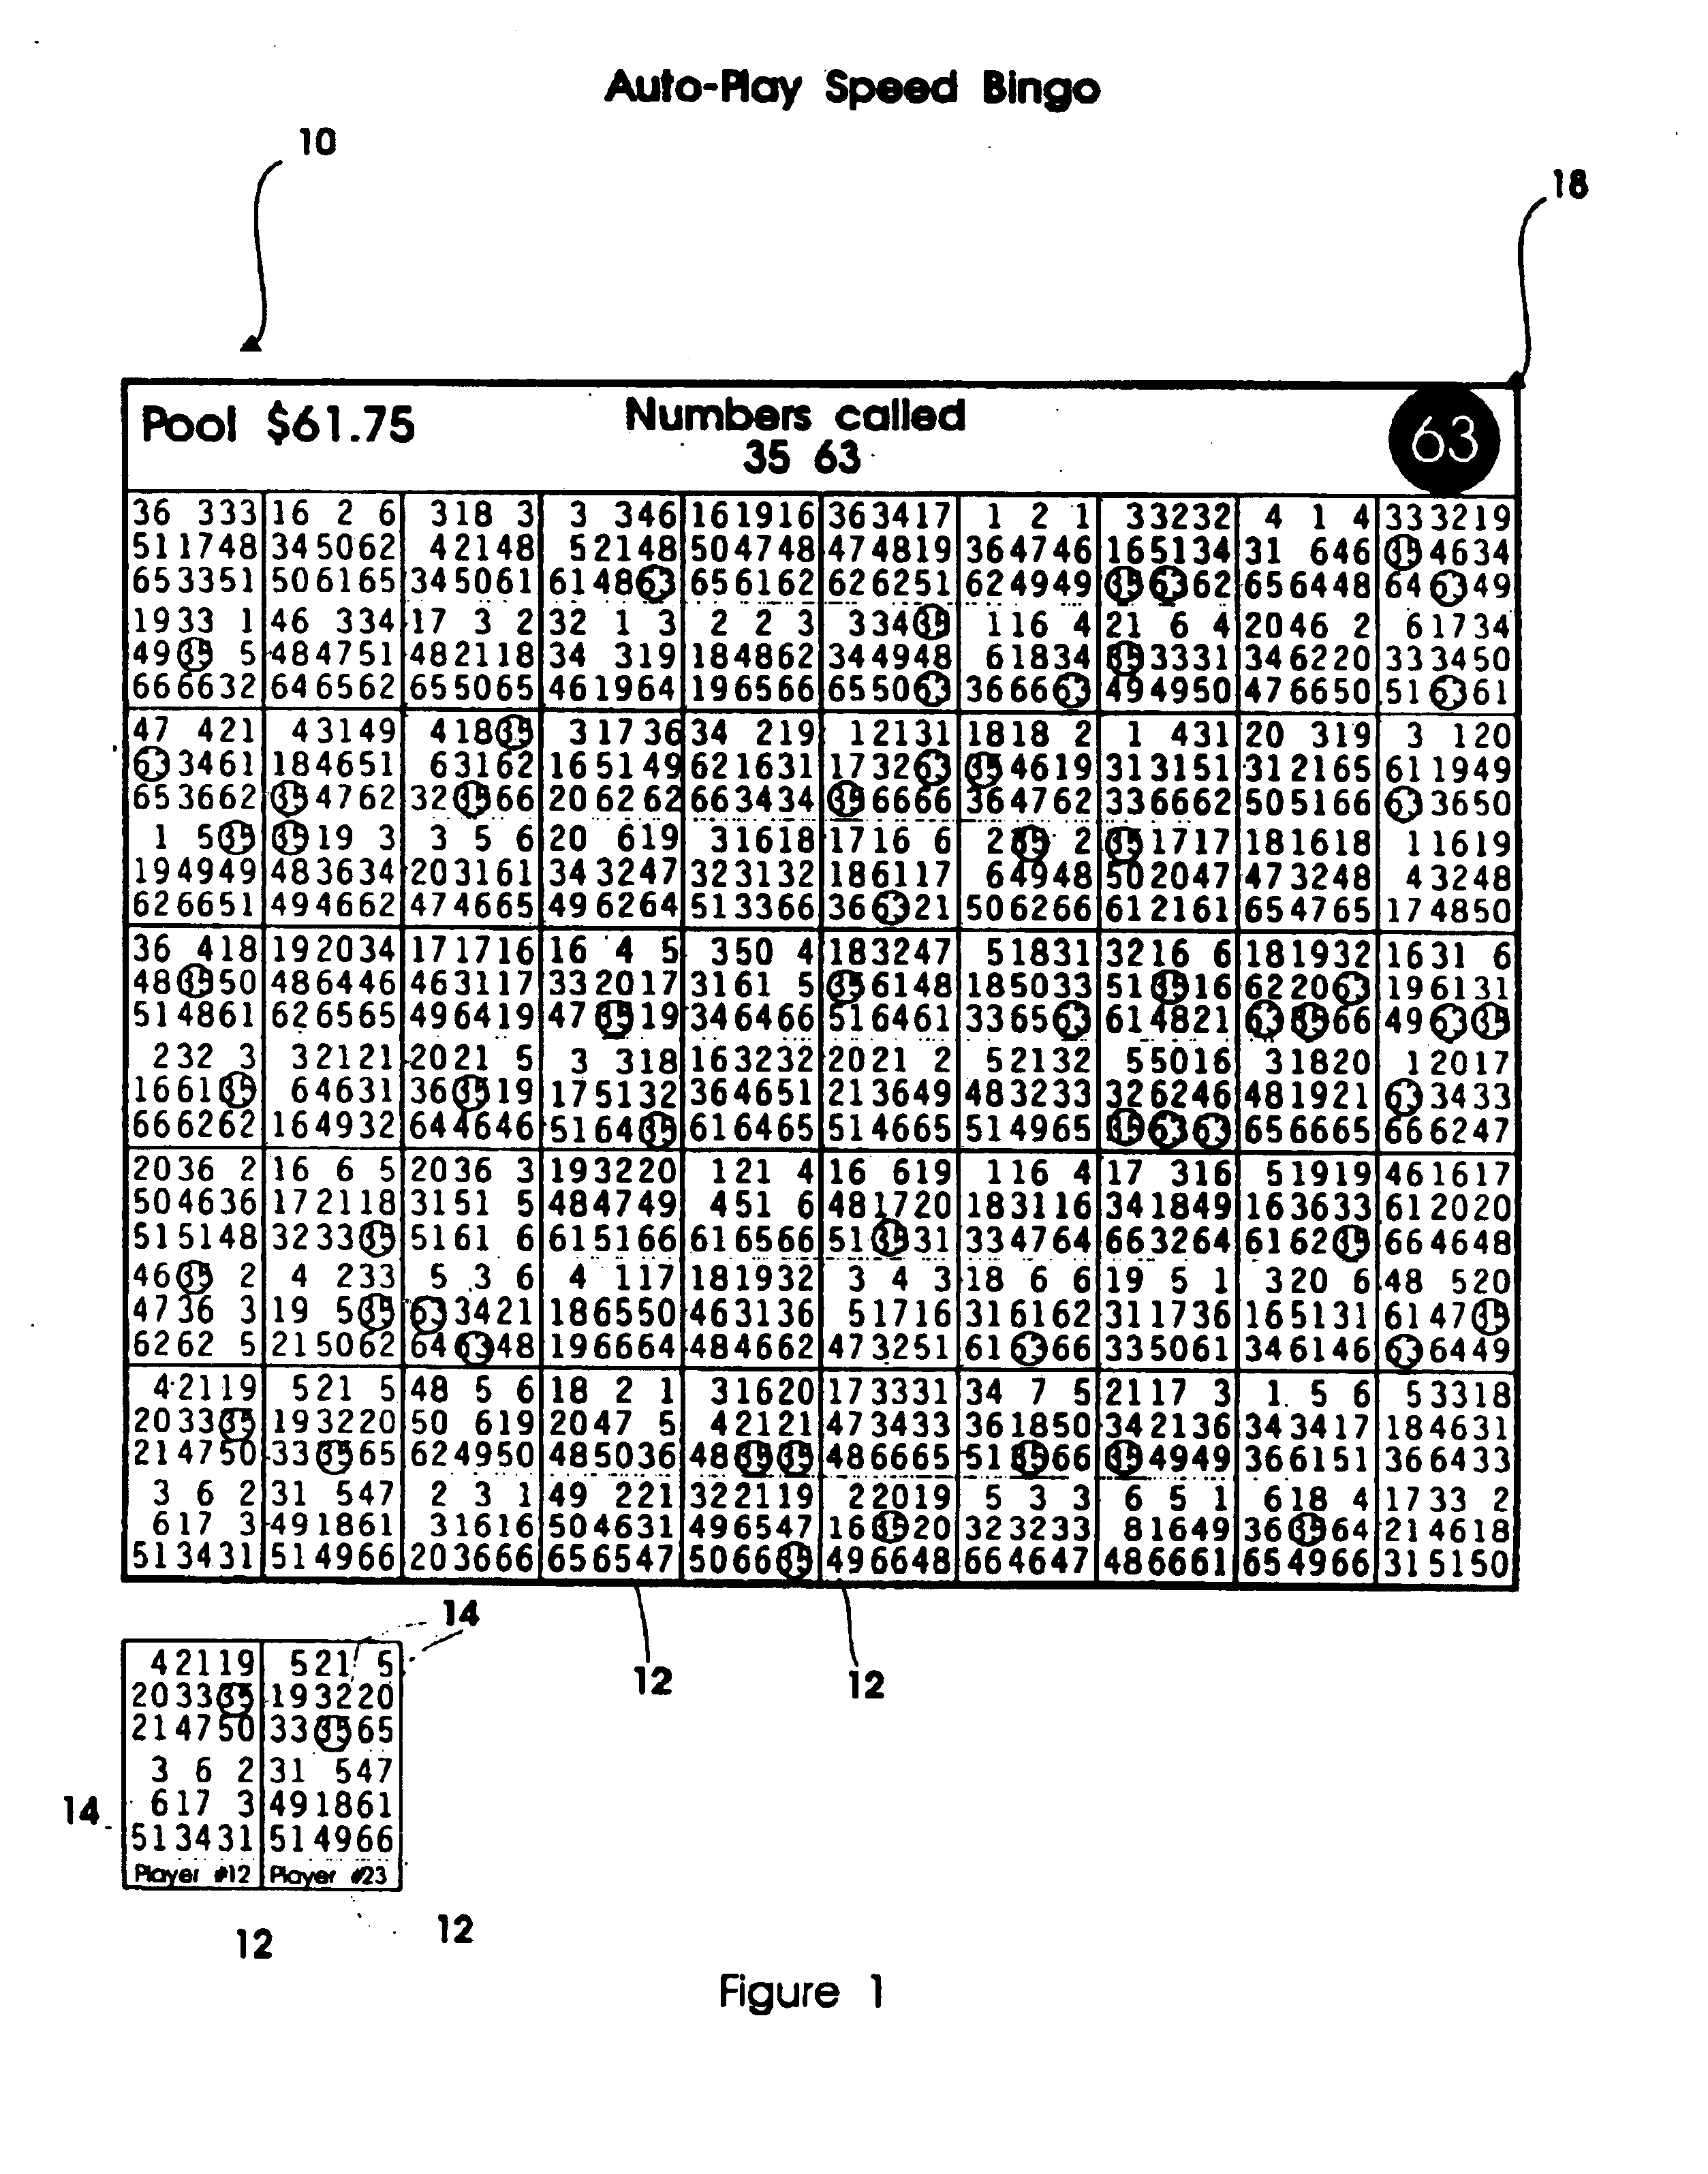 Computer game display system and processes, in electronically-controlled multi-participant game contests, for aggregating and composing a common display and for incorporating virtual participants in the context of games/contests involving active participants